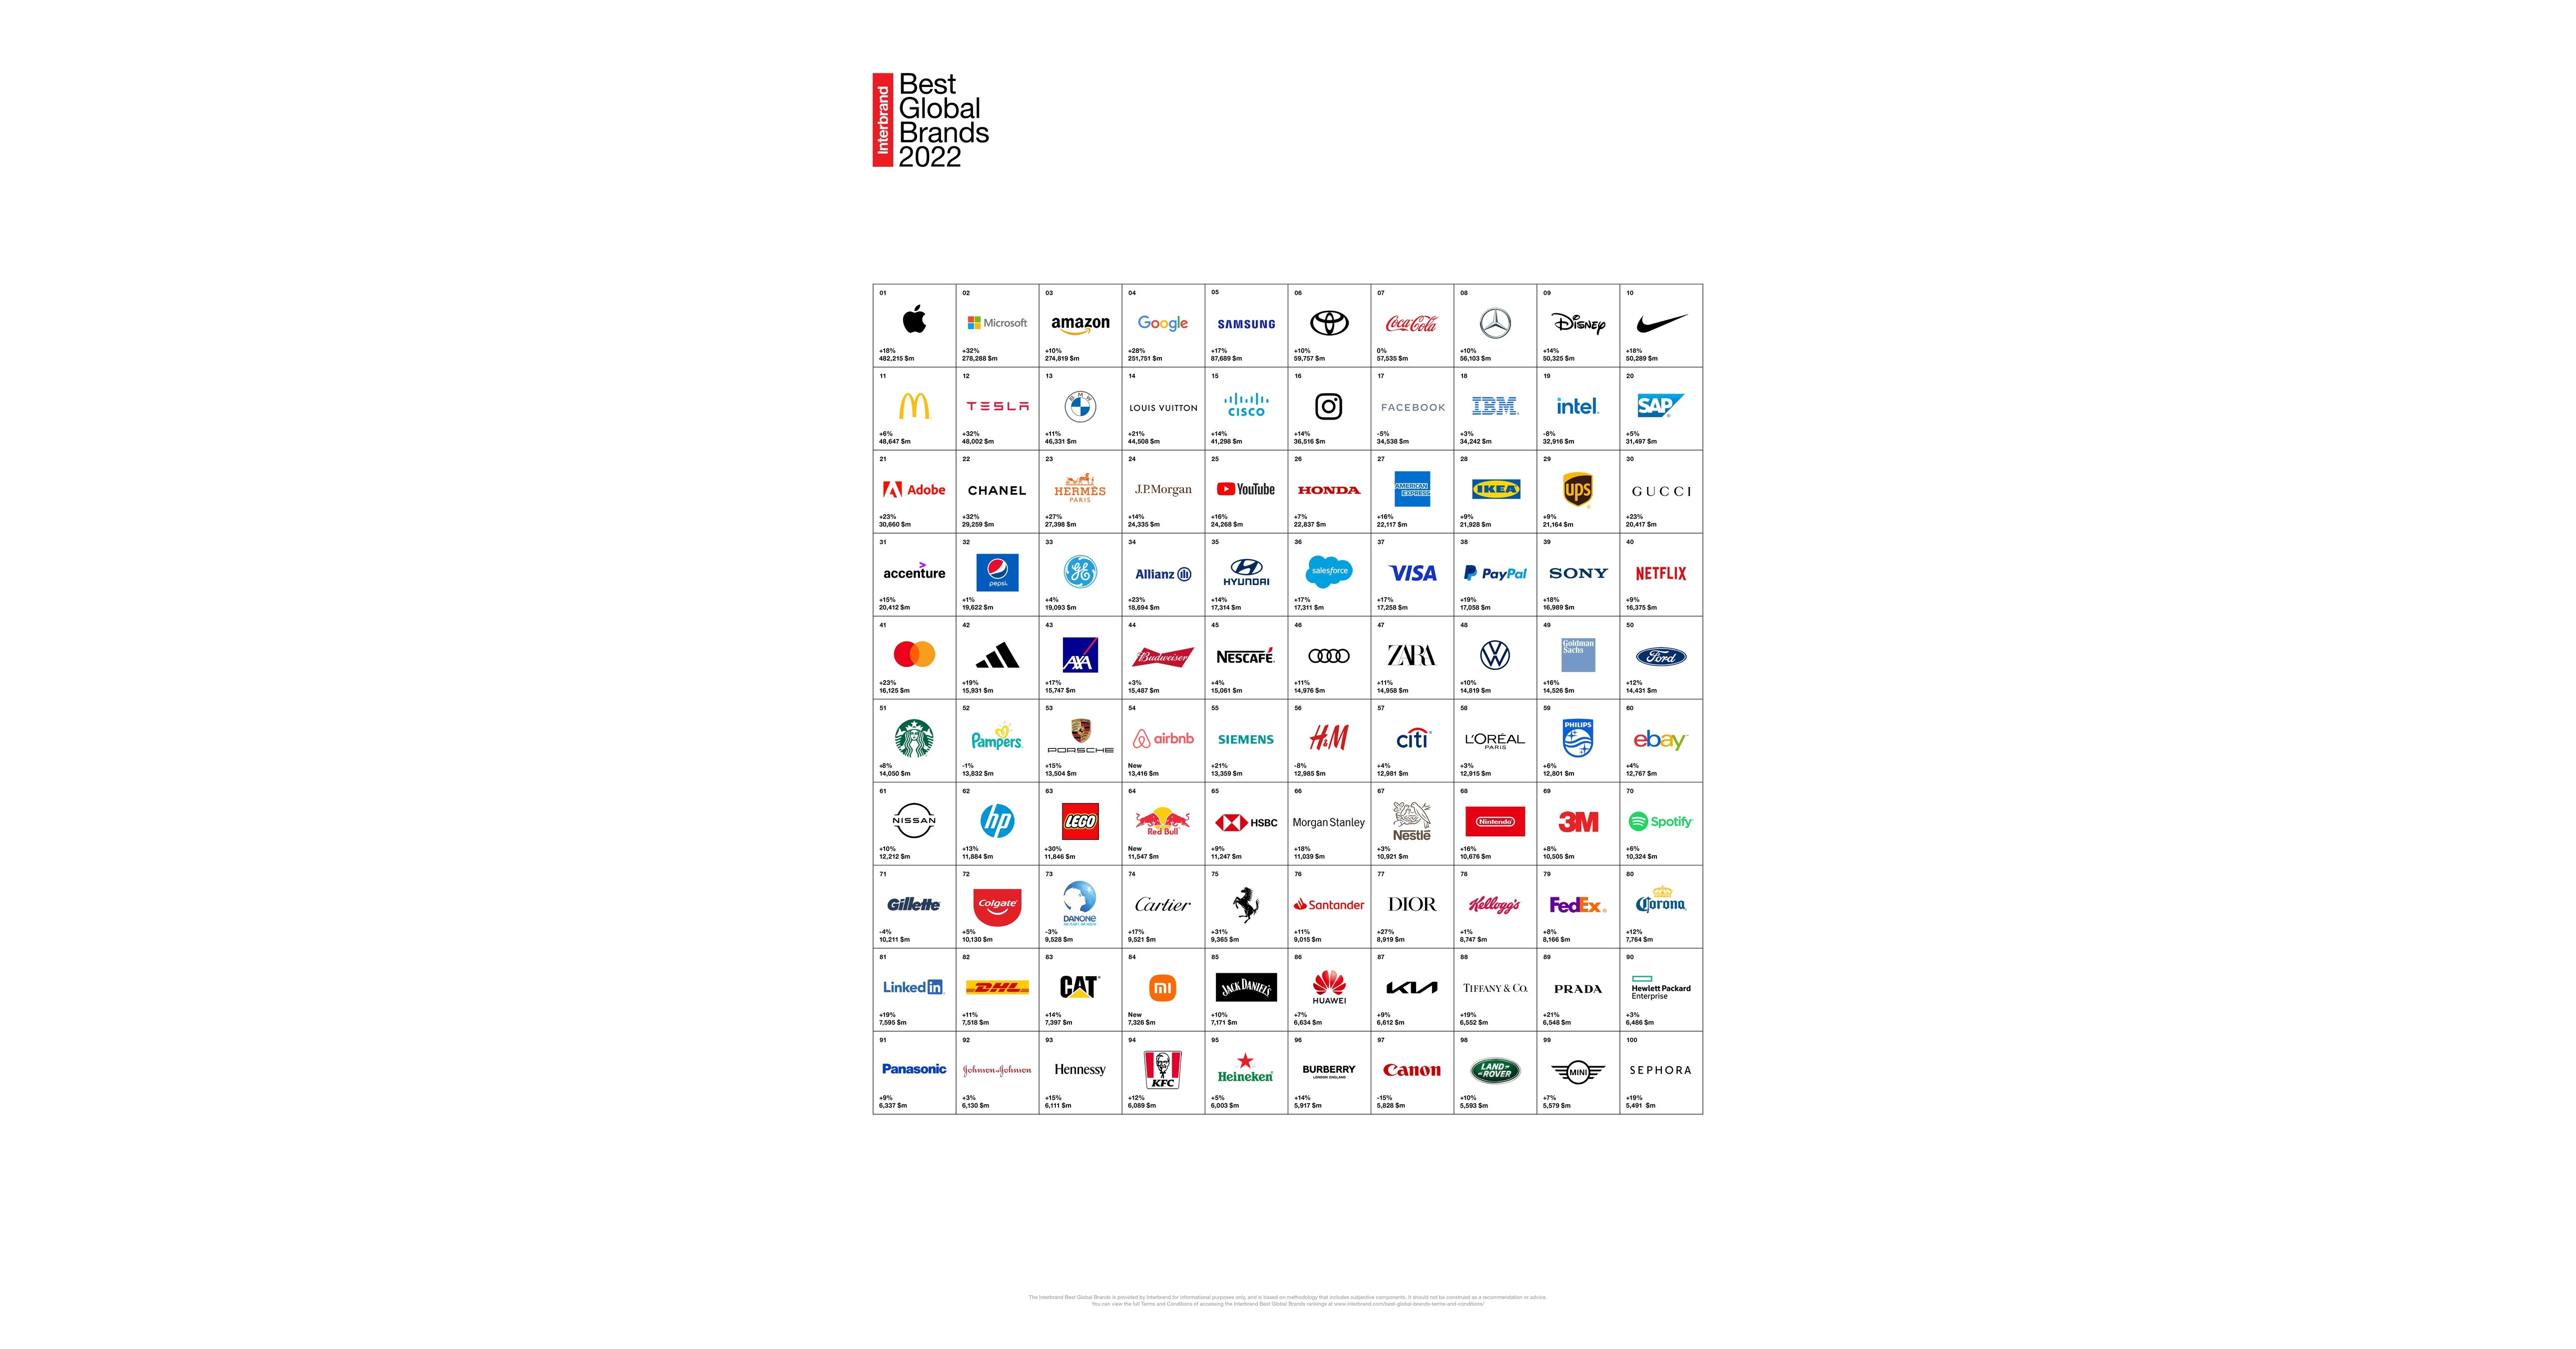 Apple Beats Google In The Interbrand Best Global Brands List For